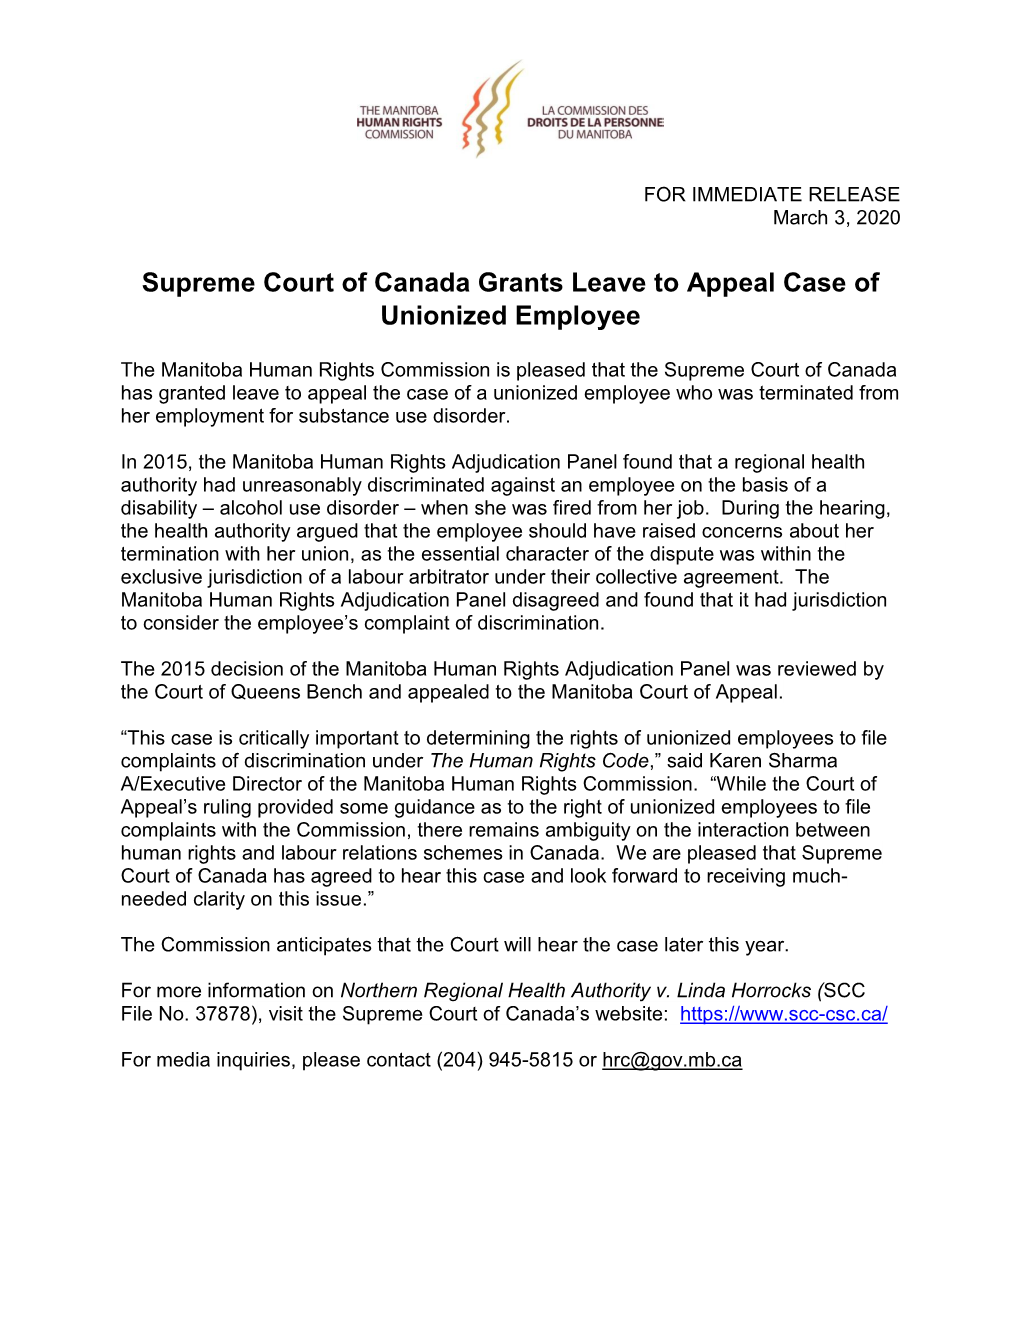 Supreme Court of Canada Grants Leave to Appeal Case of Unionized Employee